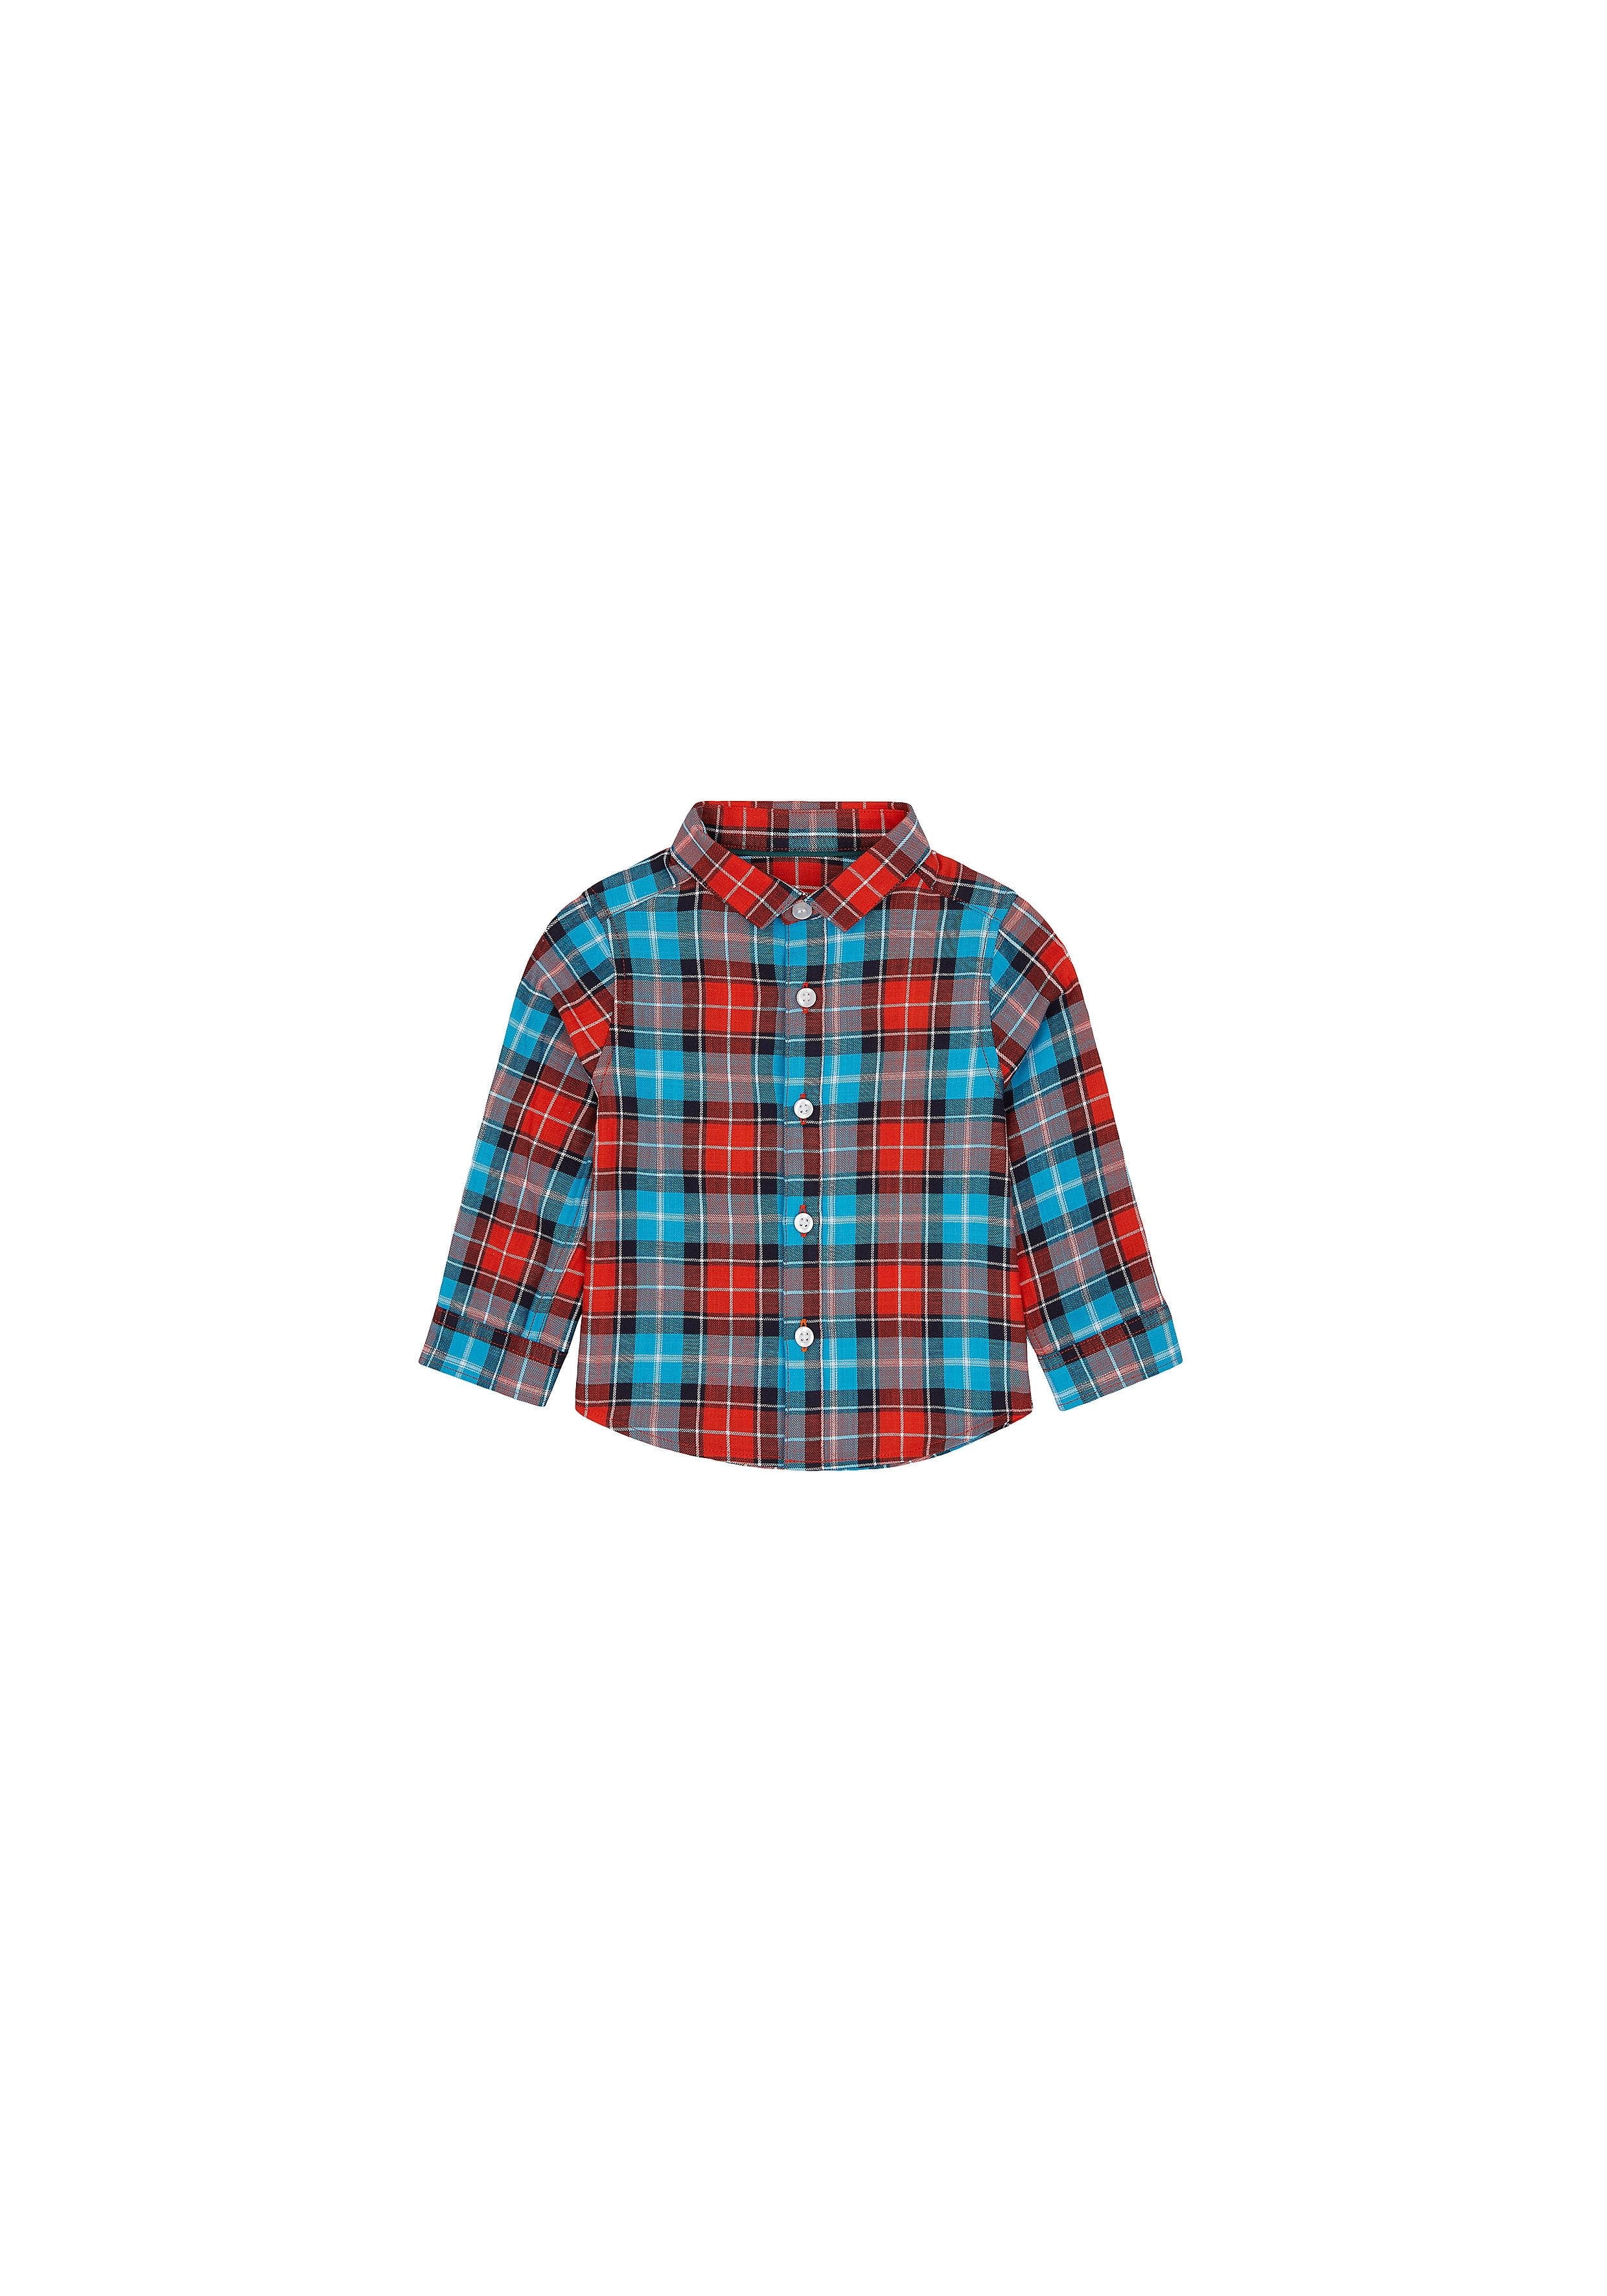 Mothercare | Boys Full Sleeves Check Shirt - Blue Red 0